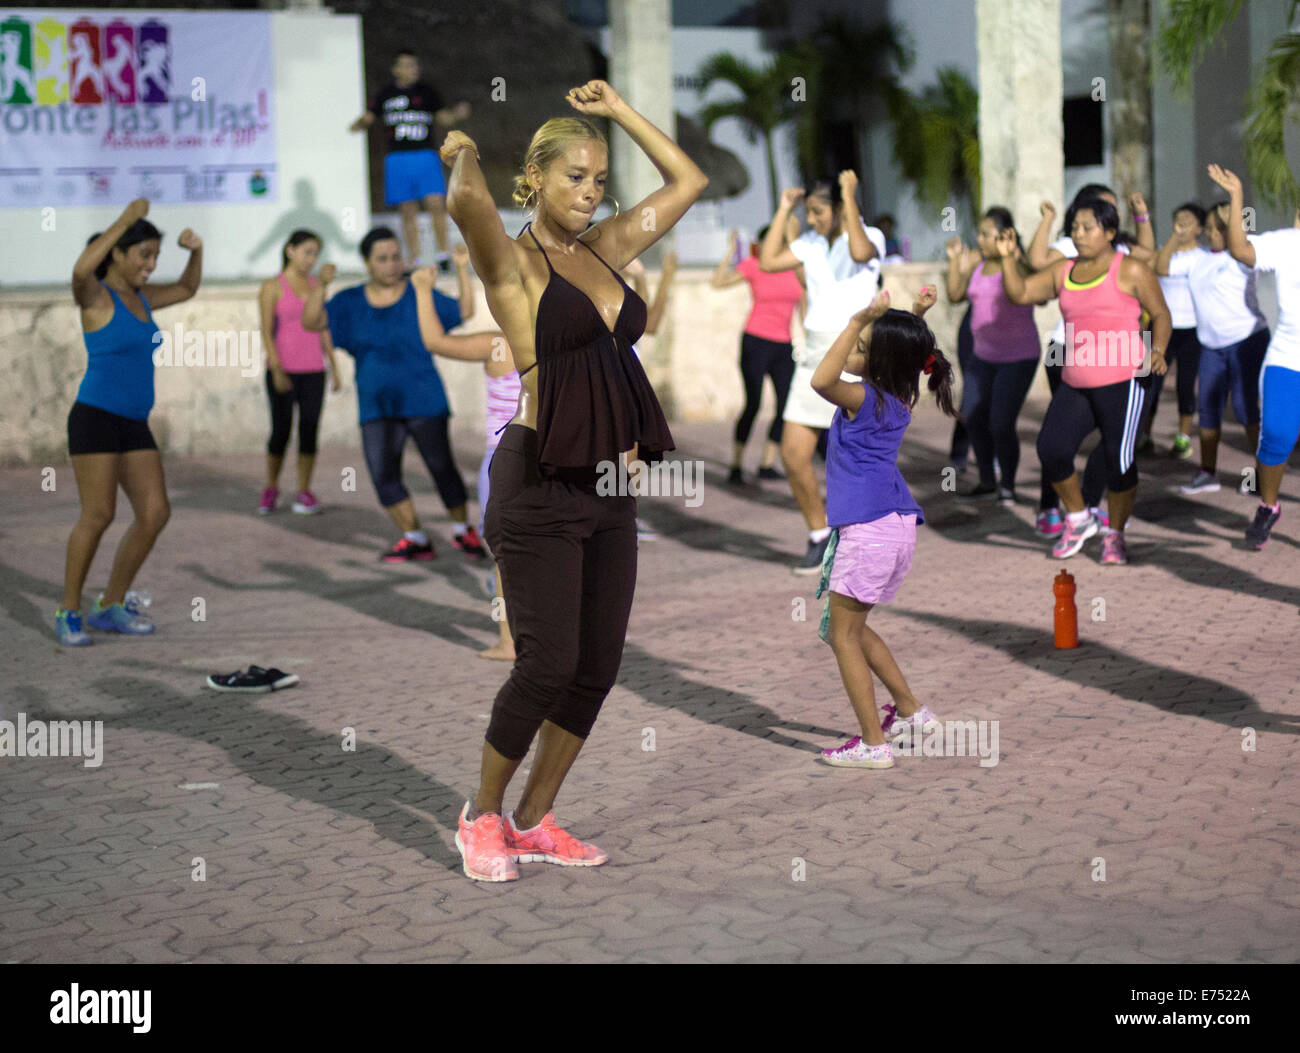 Outdoor zumba class in Mexico square with sweaty woman Stock Photo